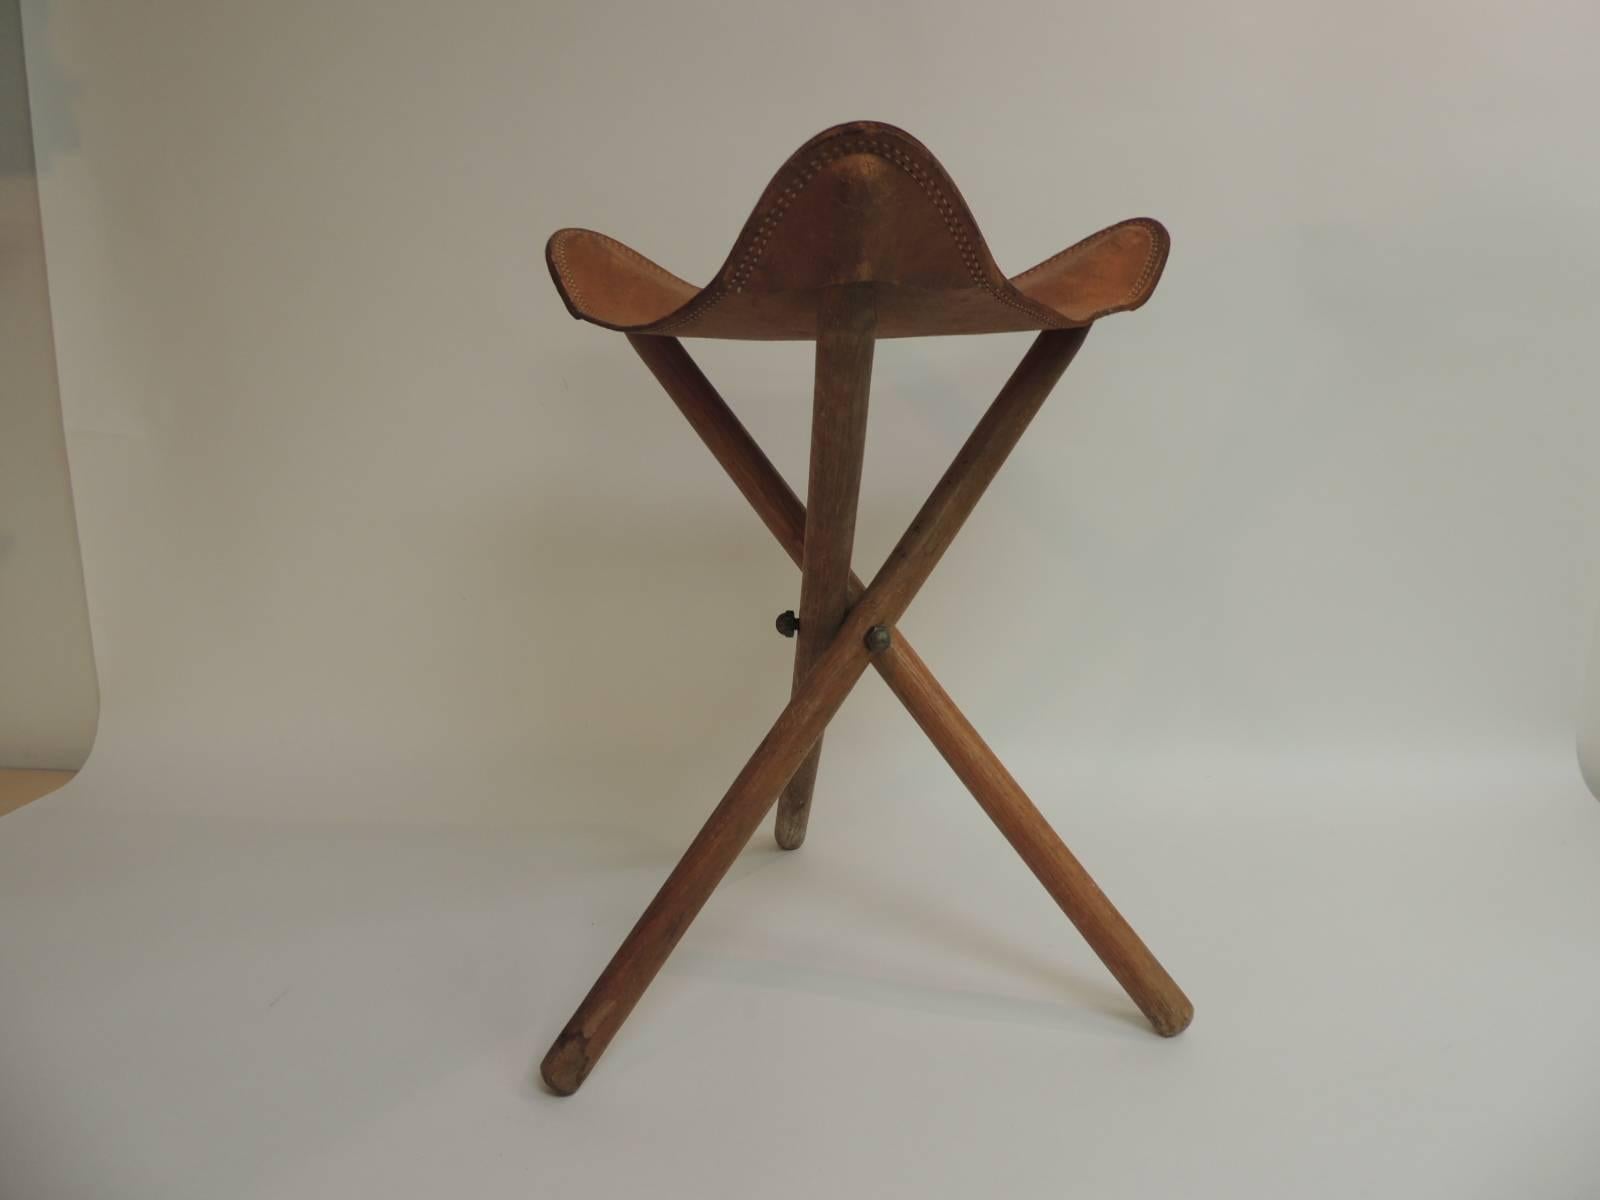 Vintage Mexican Tripod Leather and Wood Folding Stool
Vintage Mexican Tripod Leather and Wood Folding Stool. Thick hand-stitched three legs Safari stool.
Size: 15 x 15 x 17 H
